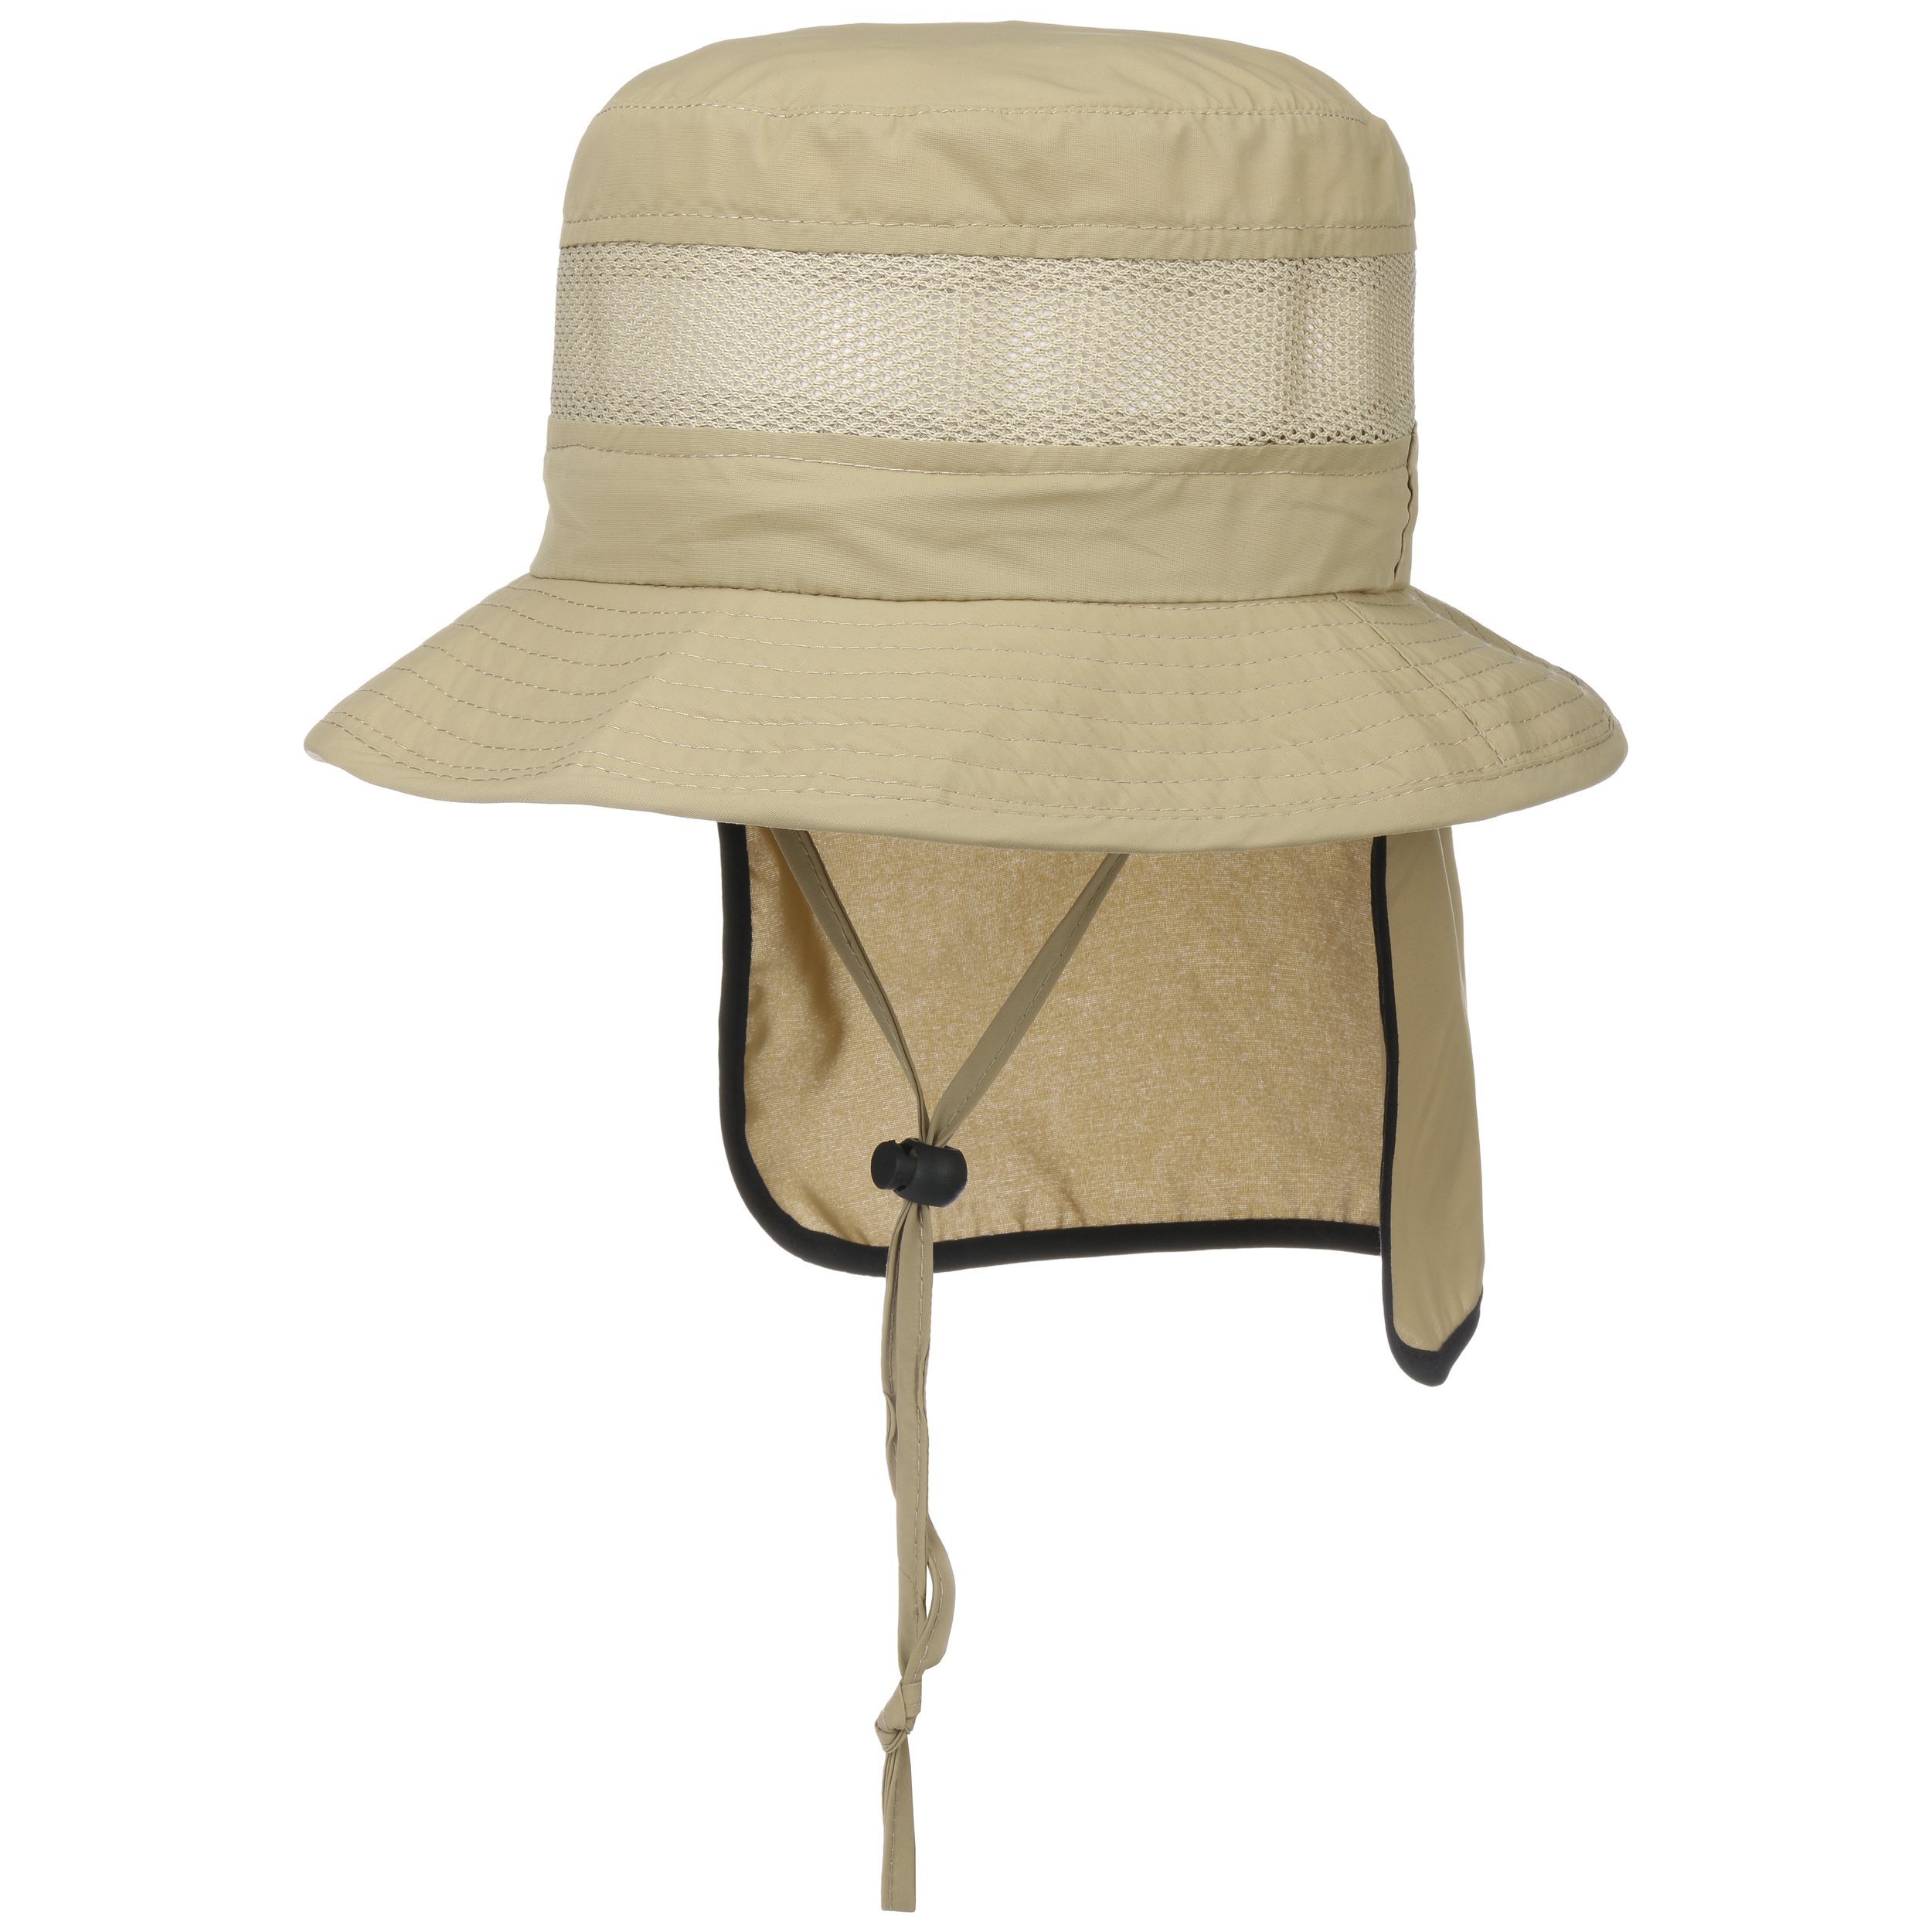 Cloth Hat with Neck Protection by Lipodo - 26,95 £